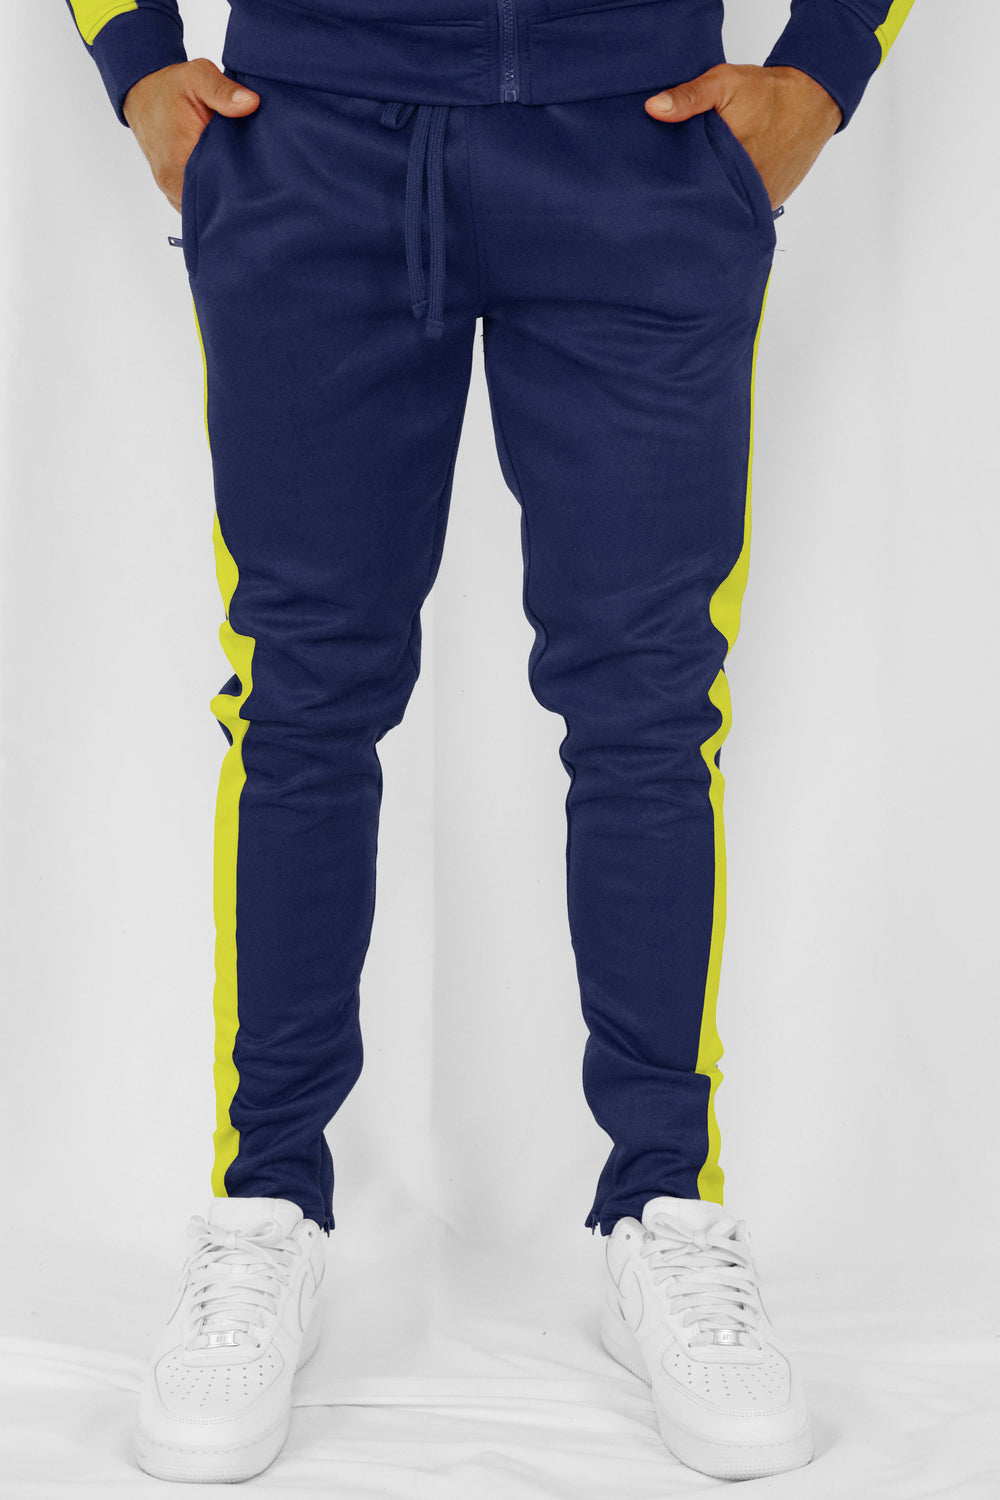 Outside Solid One Stripe Track Pants (Navy - Neon Yellow)